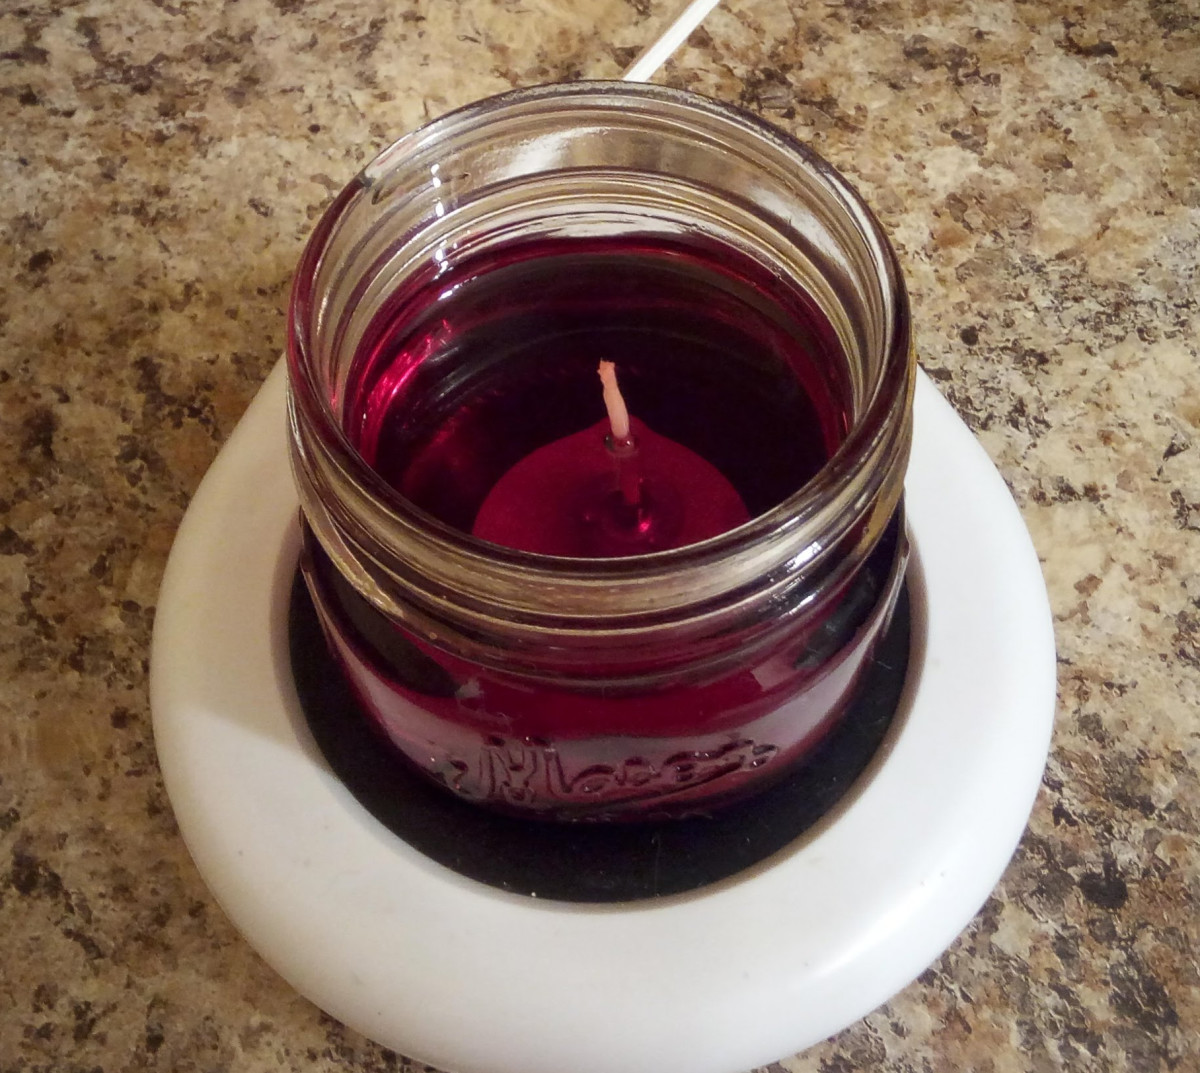 Scented candle melted on coffee warmer